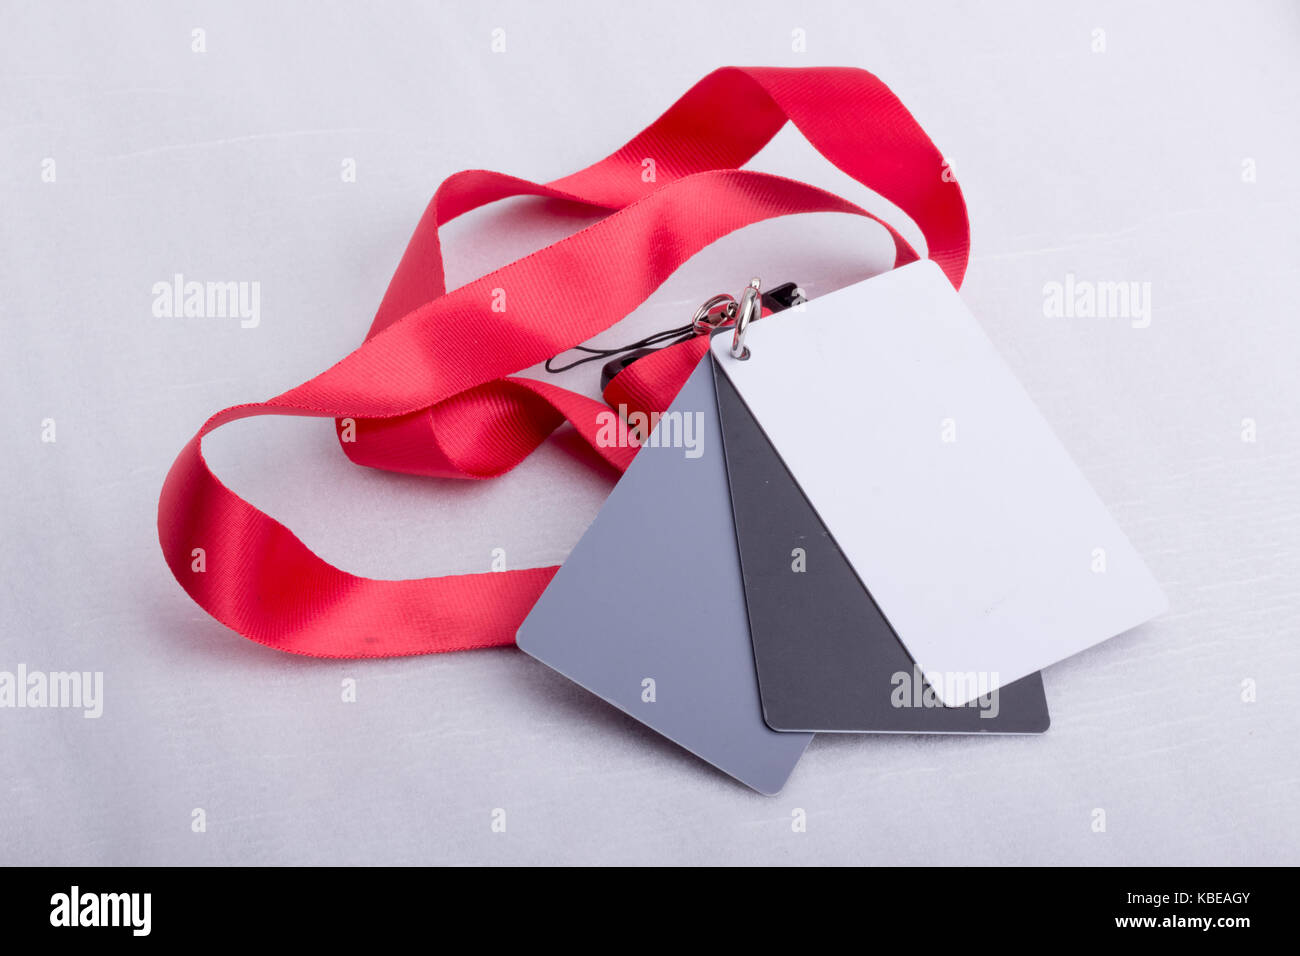 Three cards, one white, one grey and one black, attached together, and on a red strap, on a white surface. Stock Photo